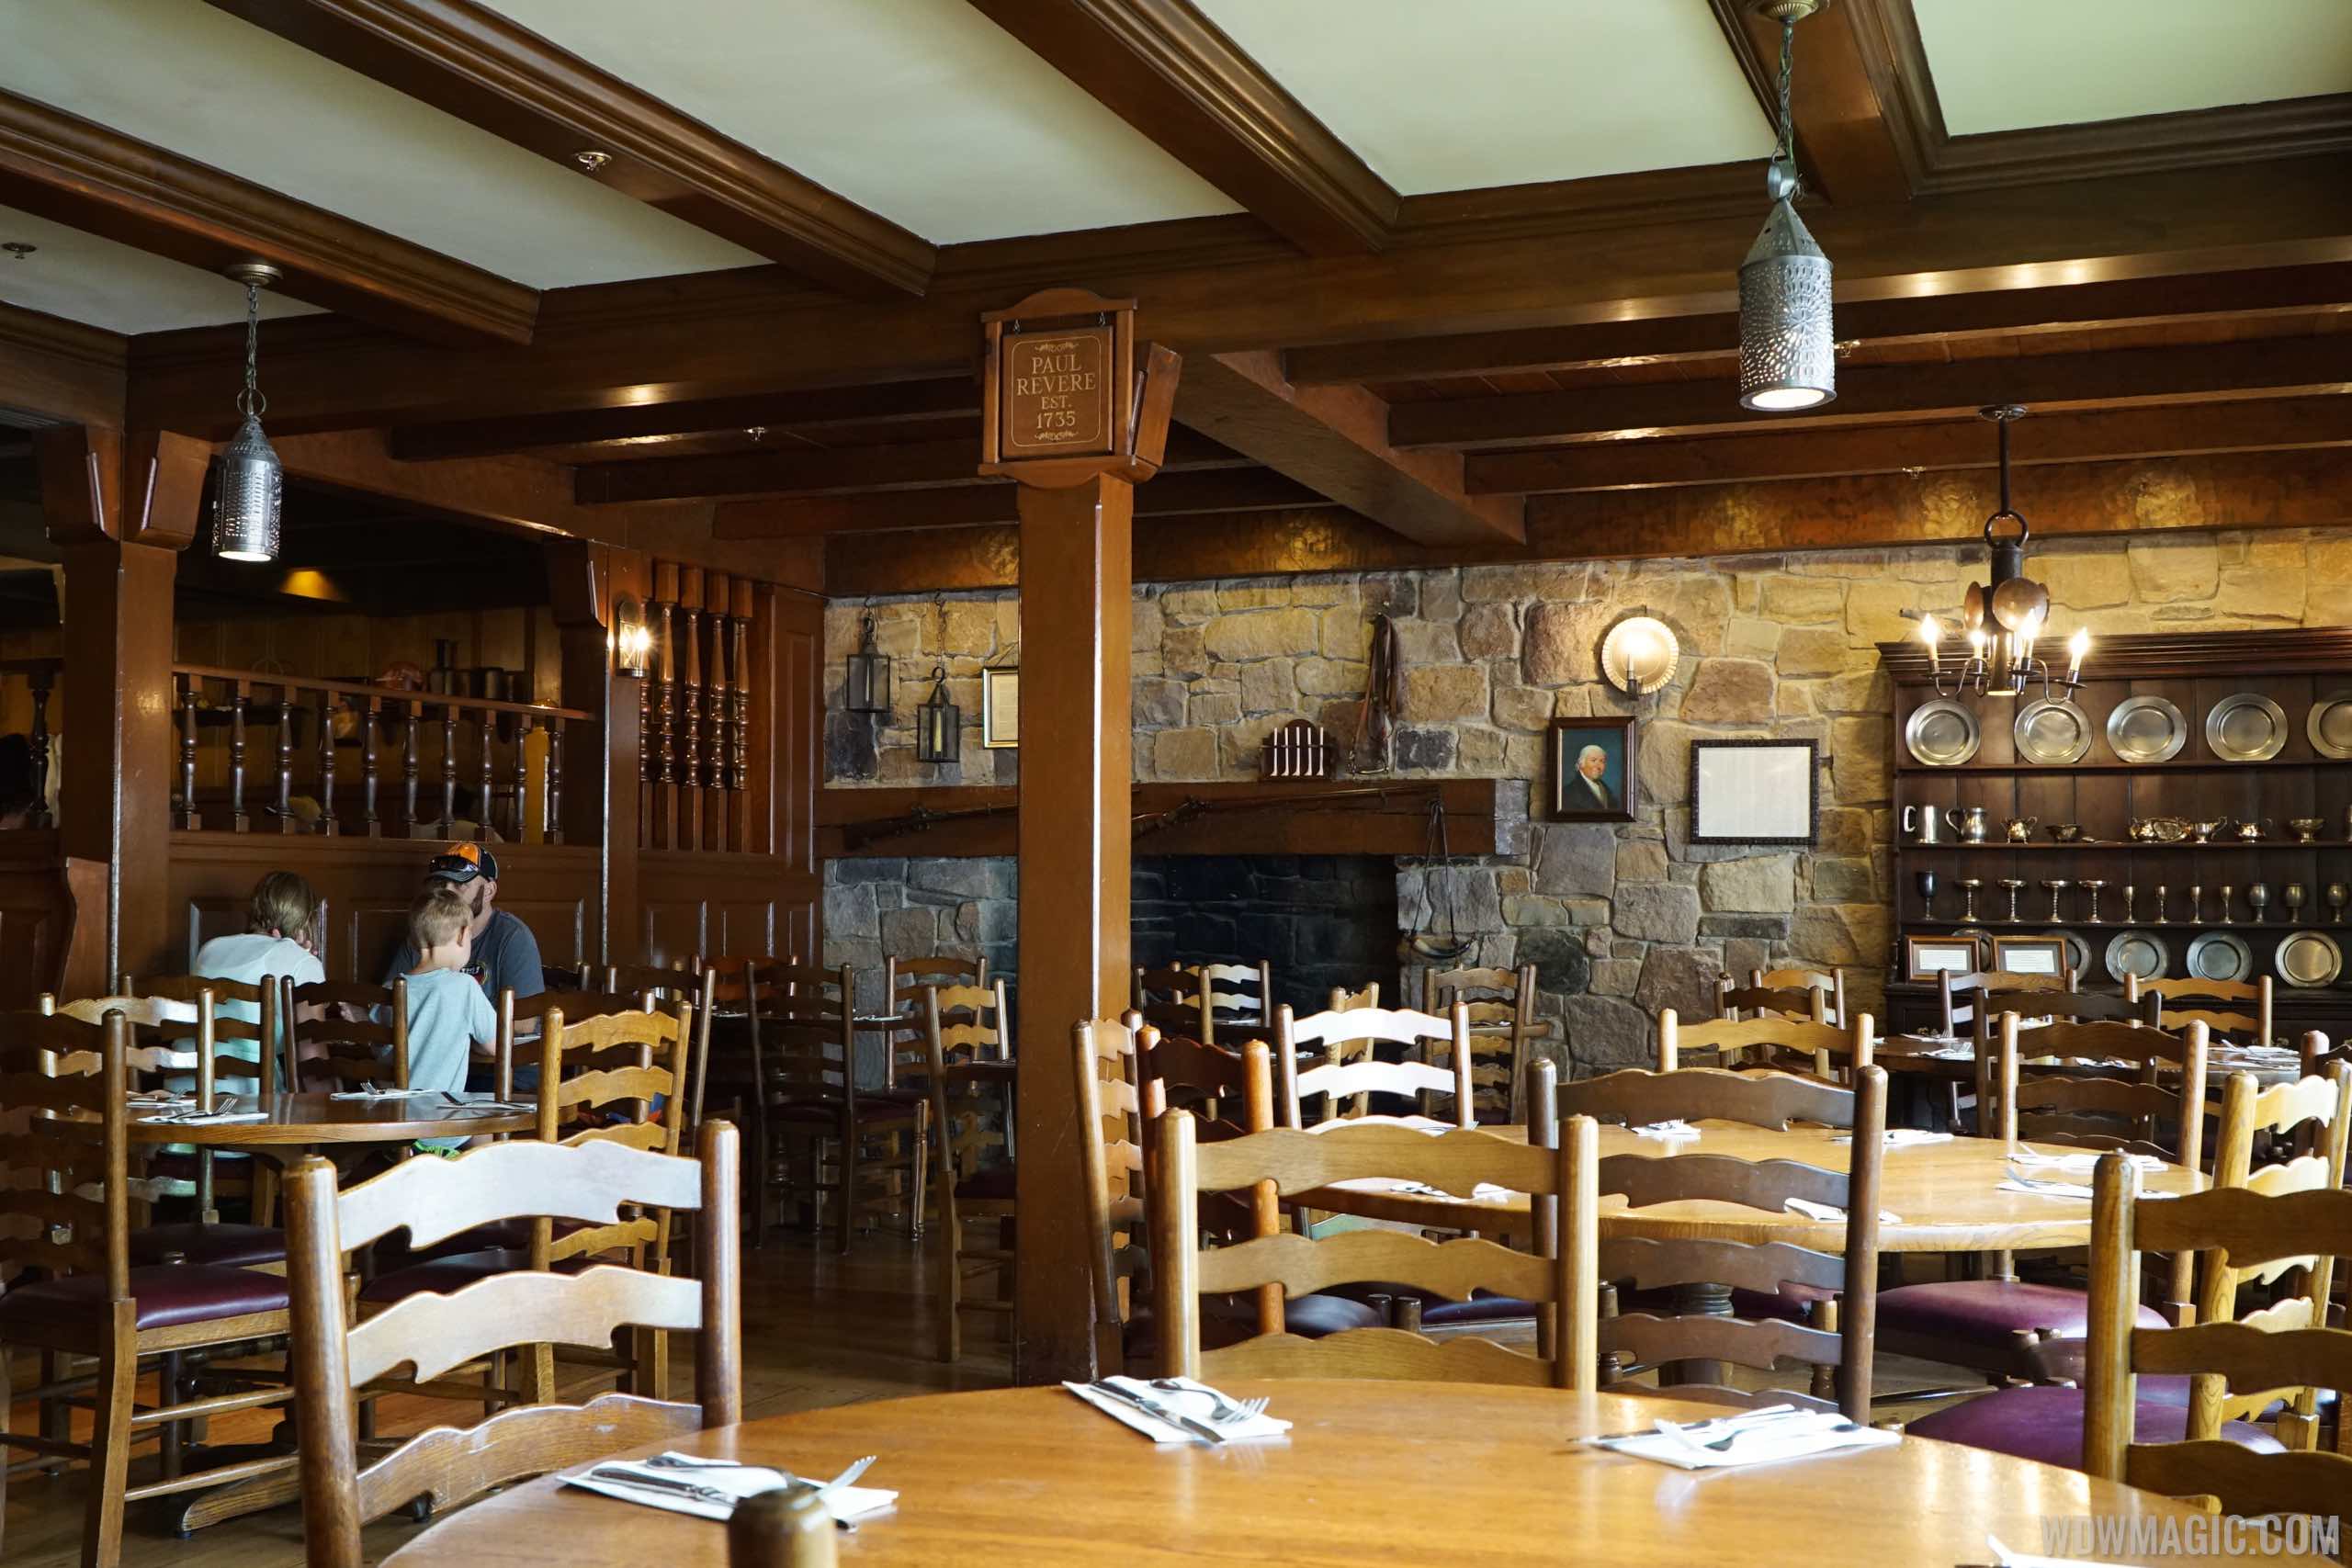 Liberty Tree Tavern closing for a lengthy refurbishment later this year